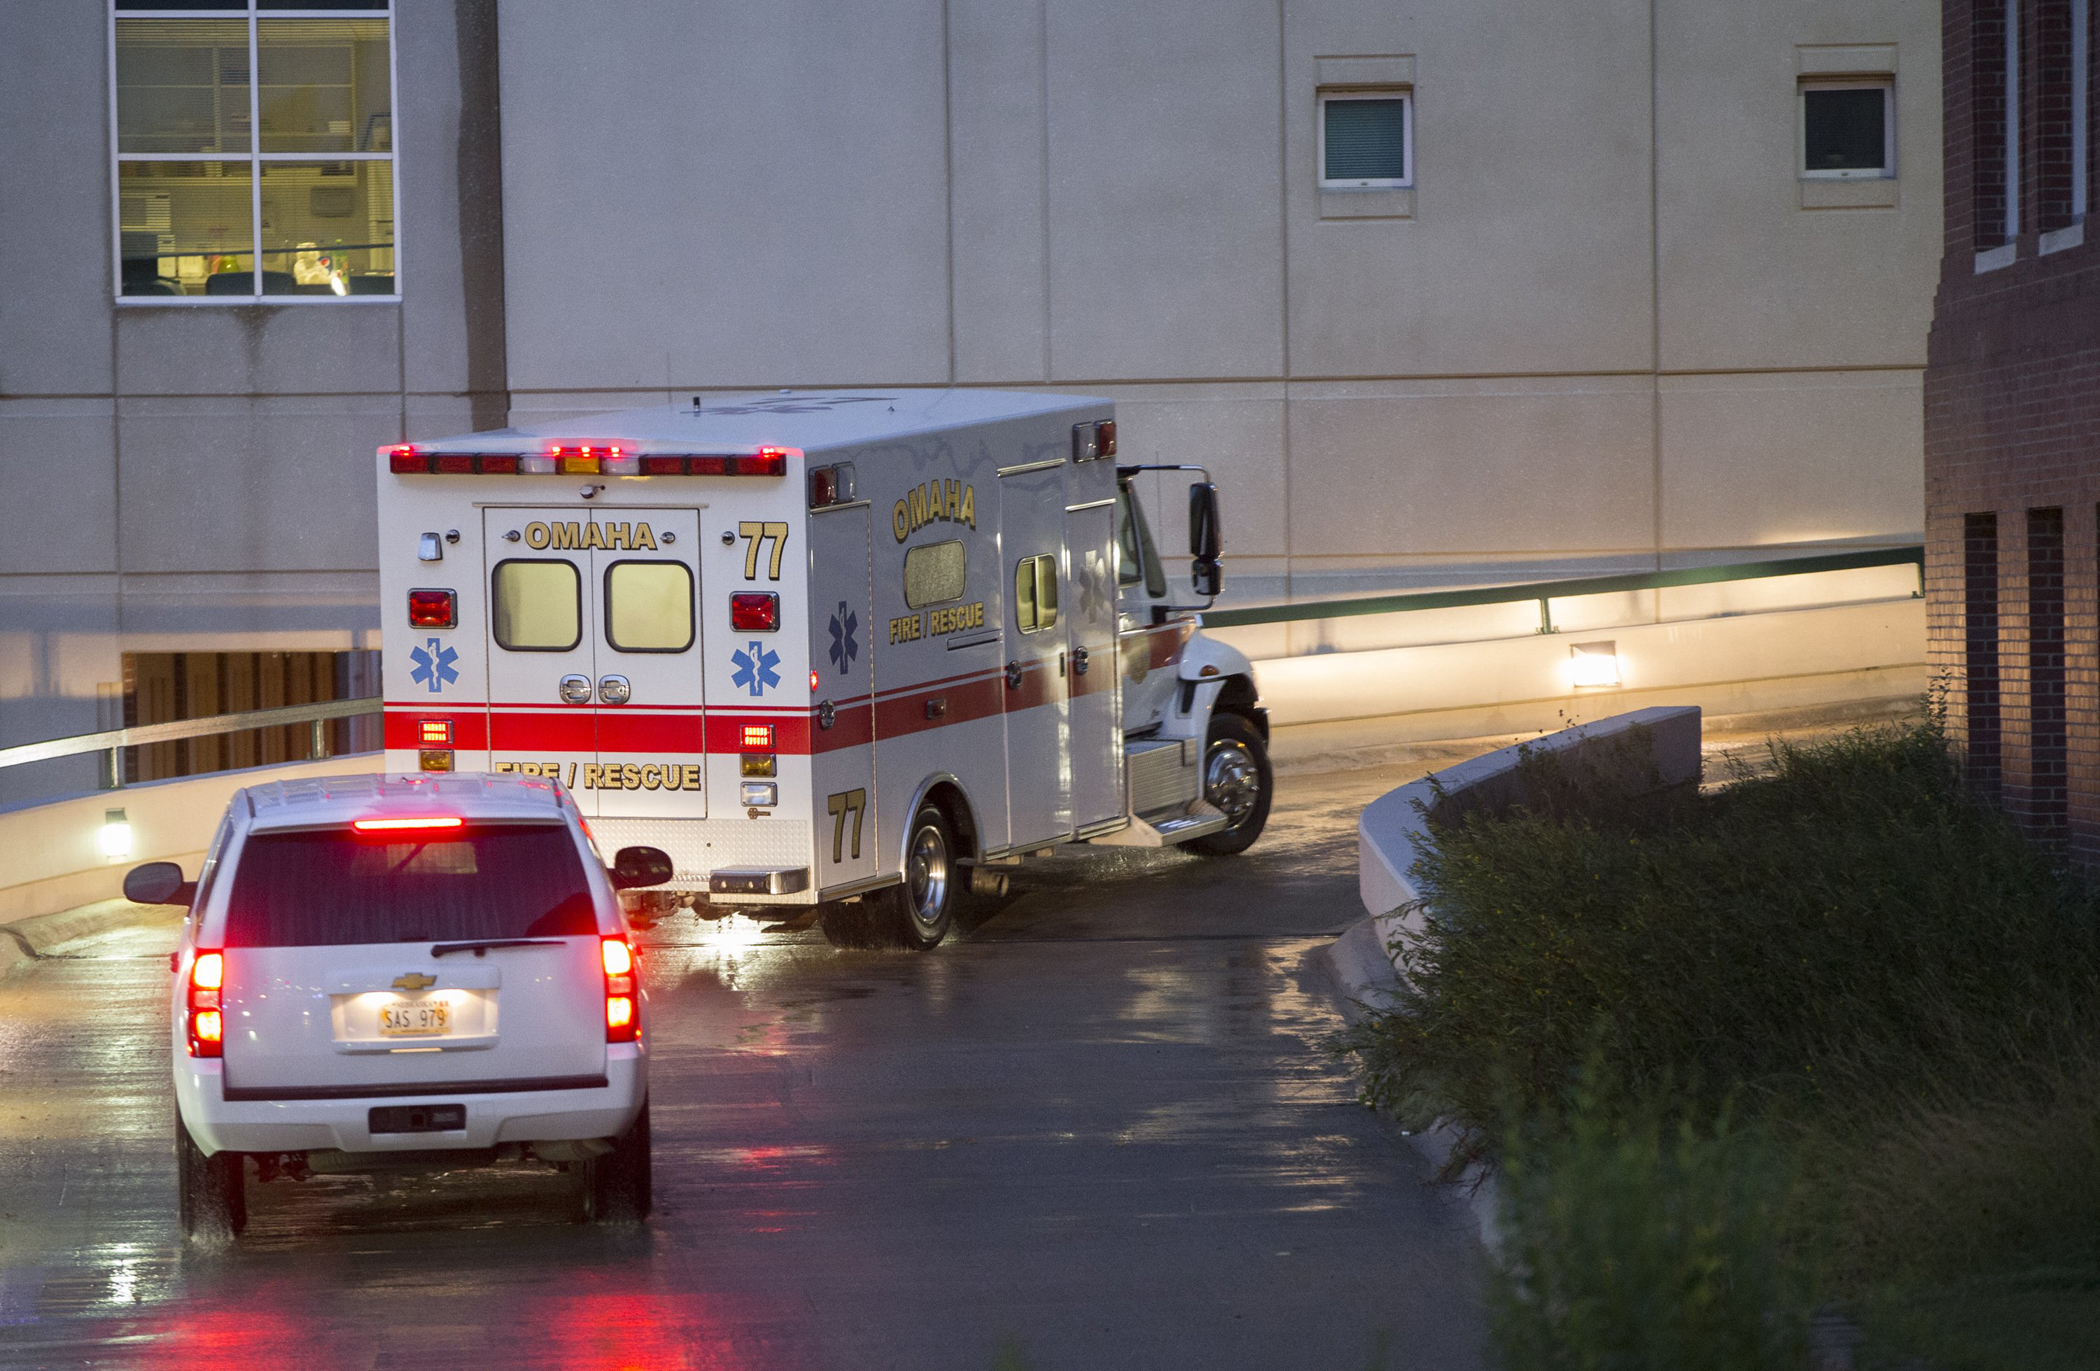 The ambulance transporting Dr. Rick Sacra, 51, who was infected with Ebola while serving as an obstetrician in Liberia, arrives to the Nebraska Medical Center in Omaha, Neb., Sept. 5, 2014. (Nati Harnik—AP)